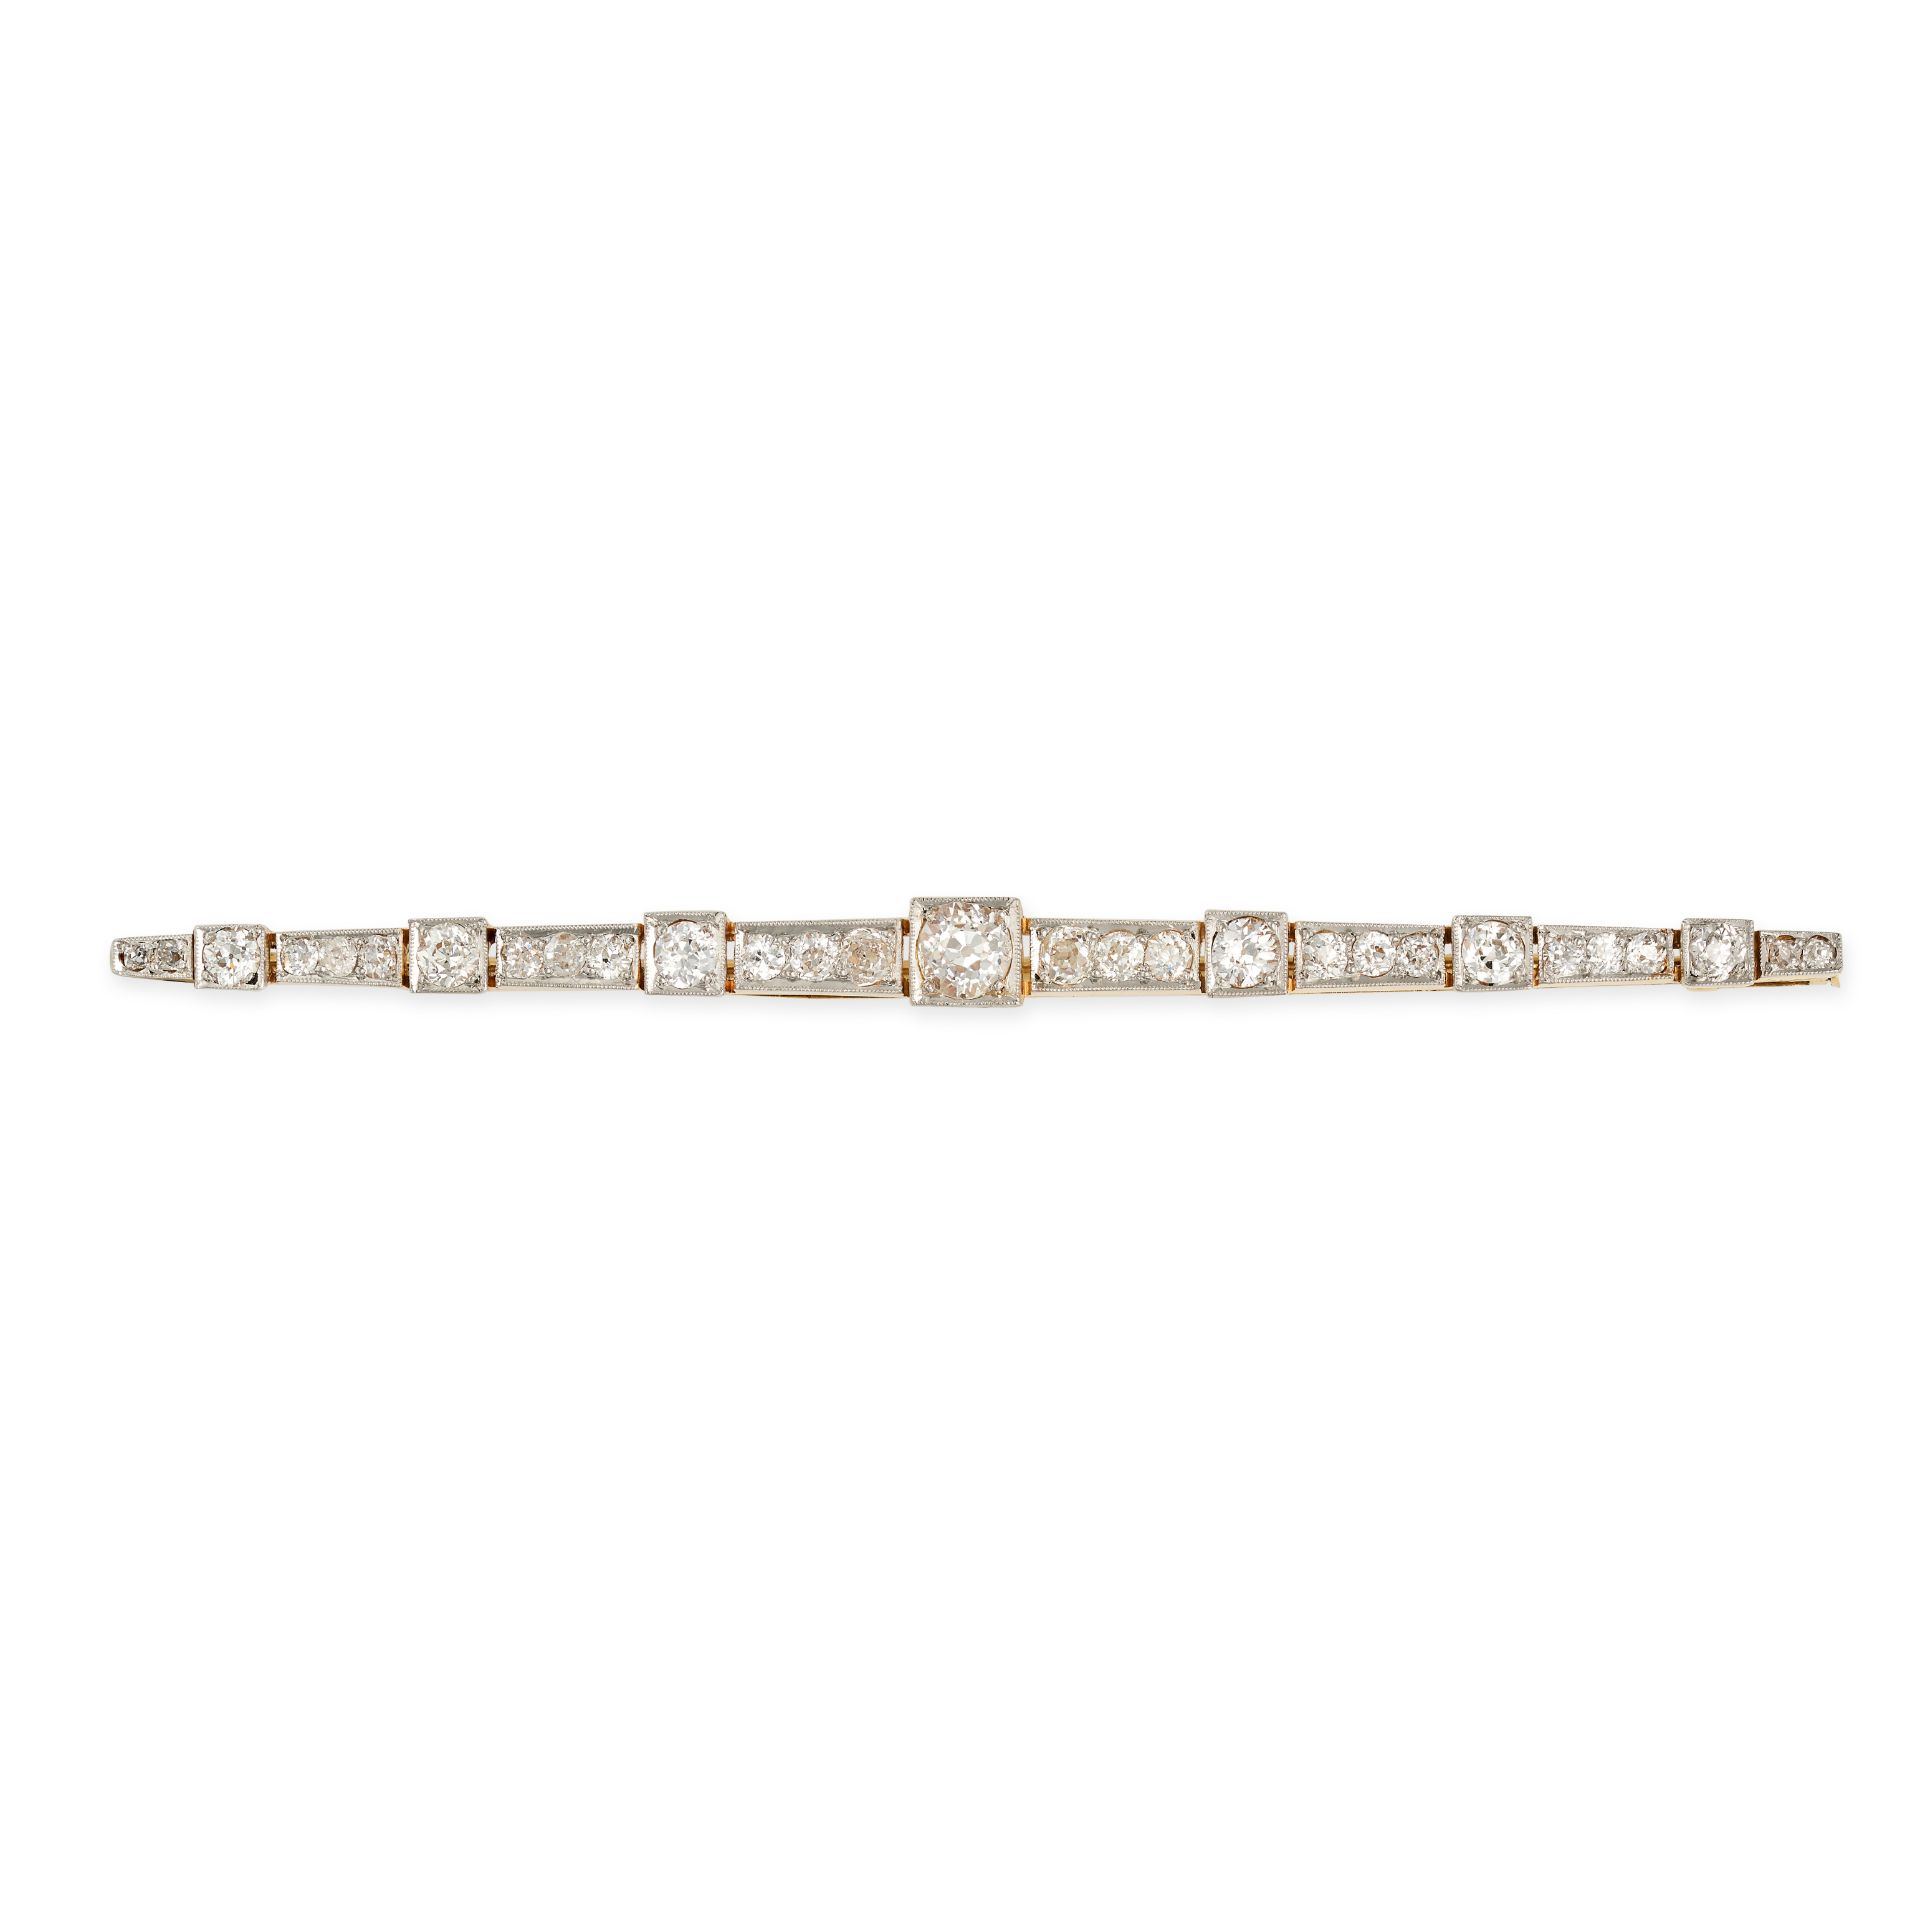 AN ANTIQUE DIAMOND BAR BROOCH, EARLY 20TH CENTURY in yellow gold and platinum, the elongated bar ...